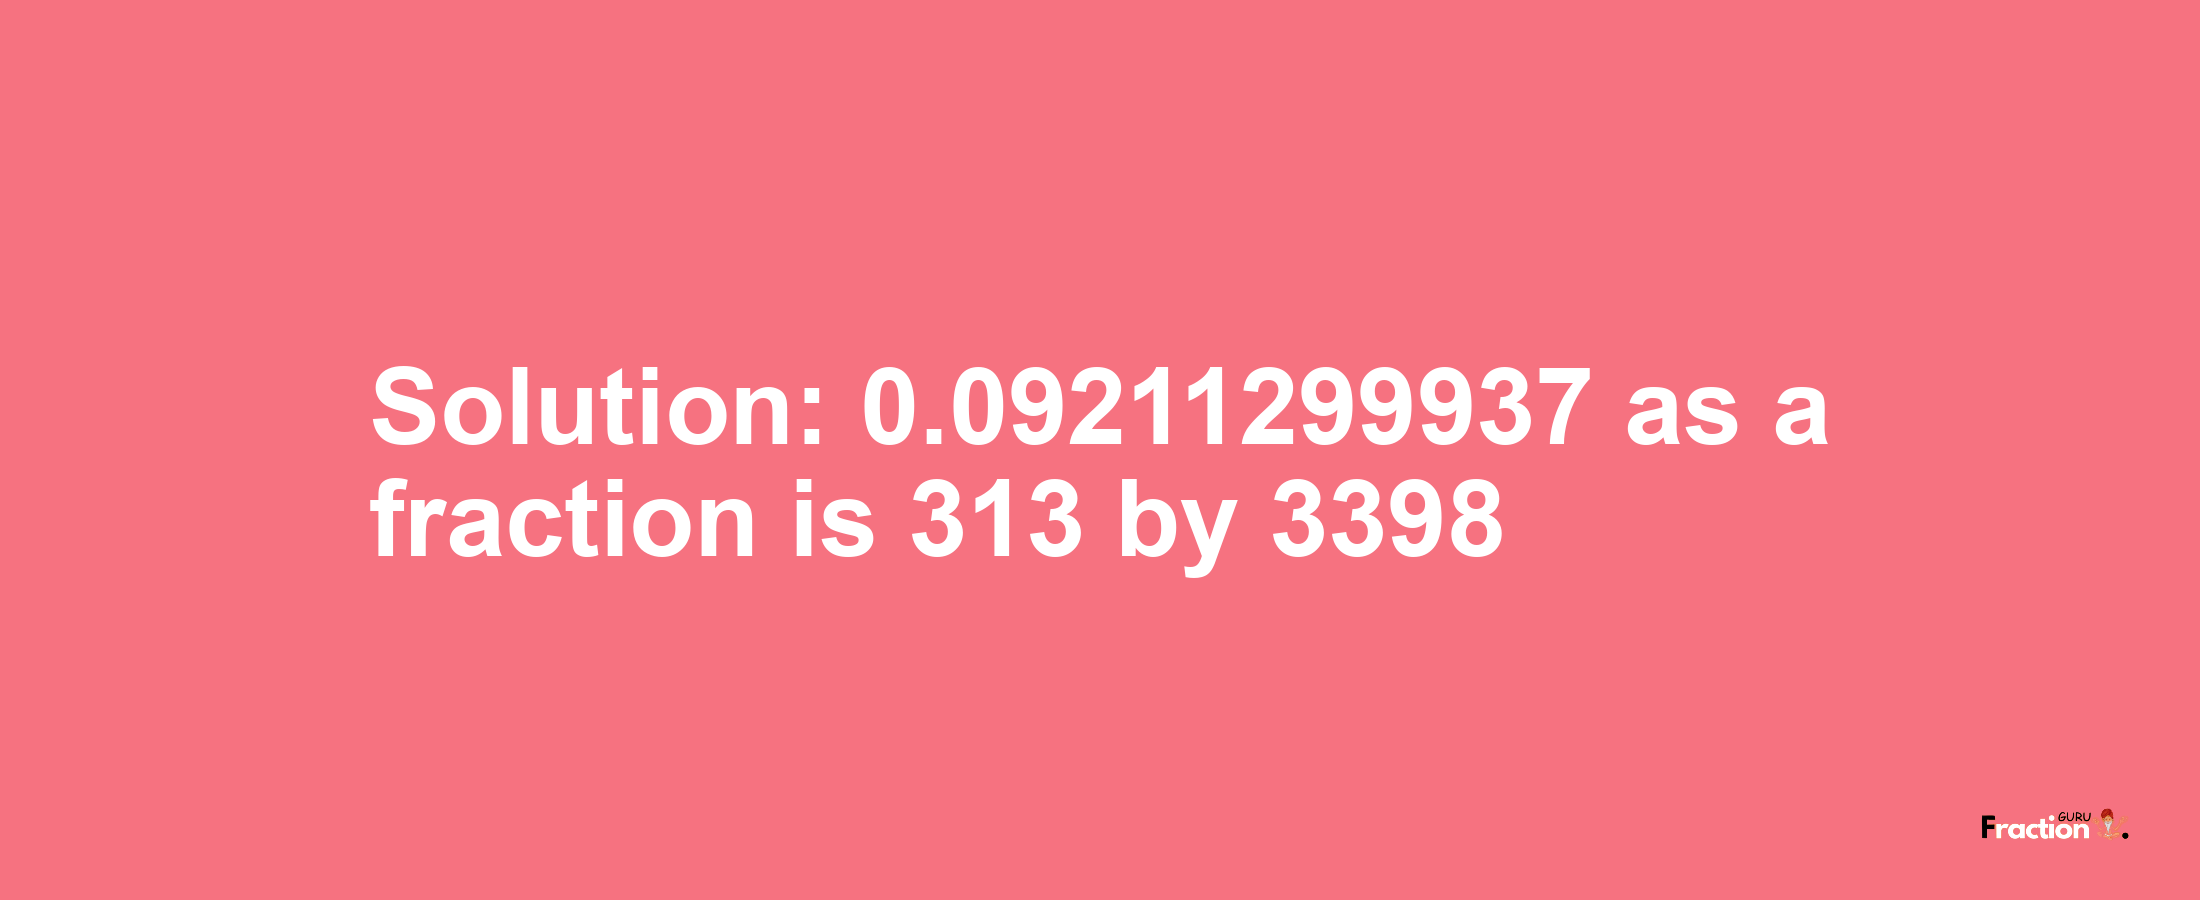 Solution:0.09211299937 as a fraction is 313/3398